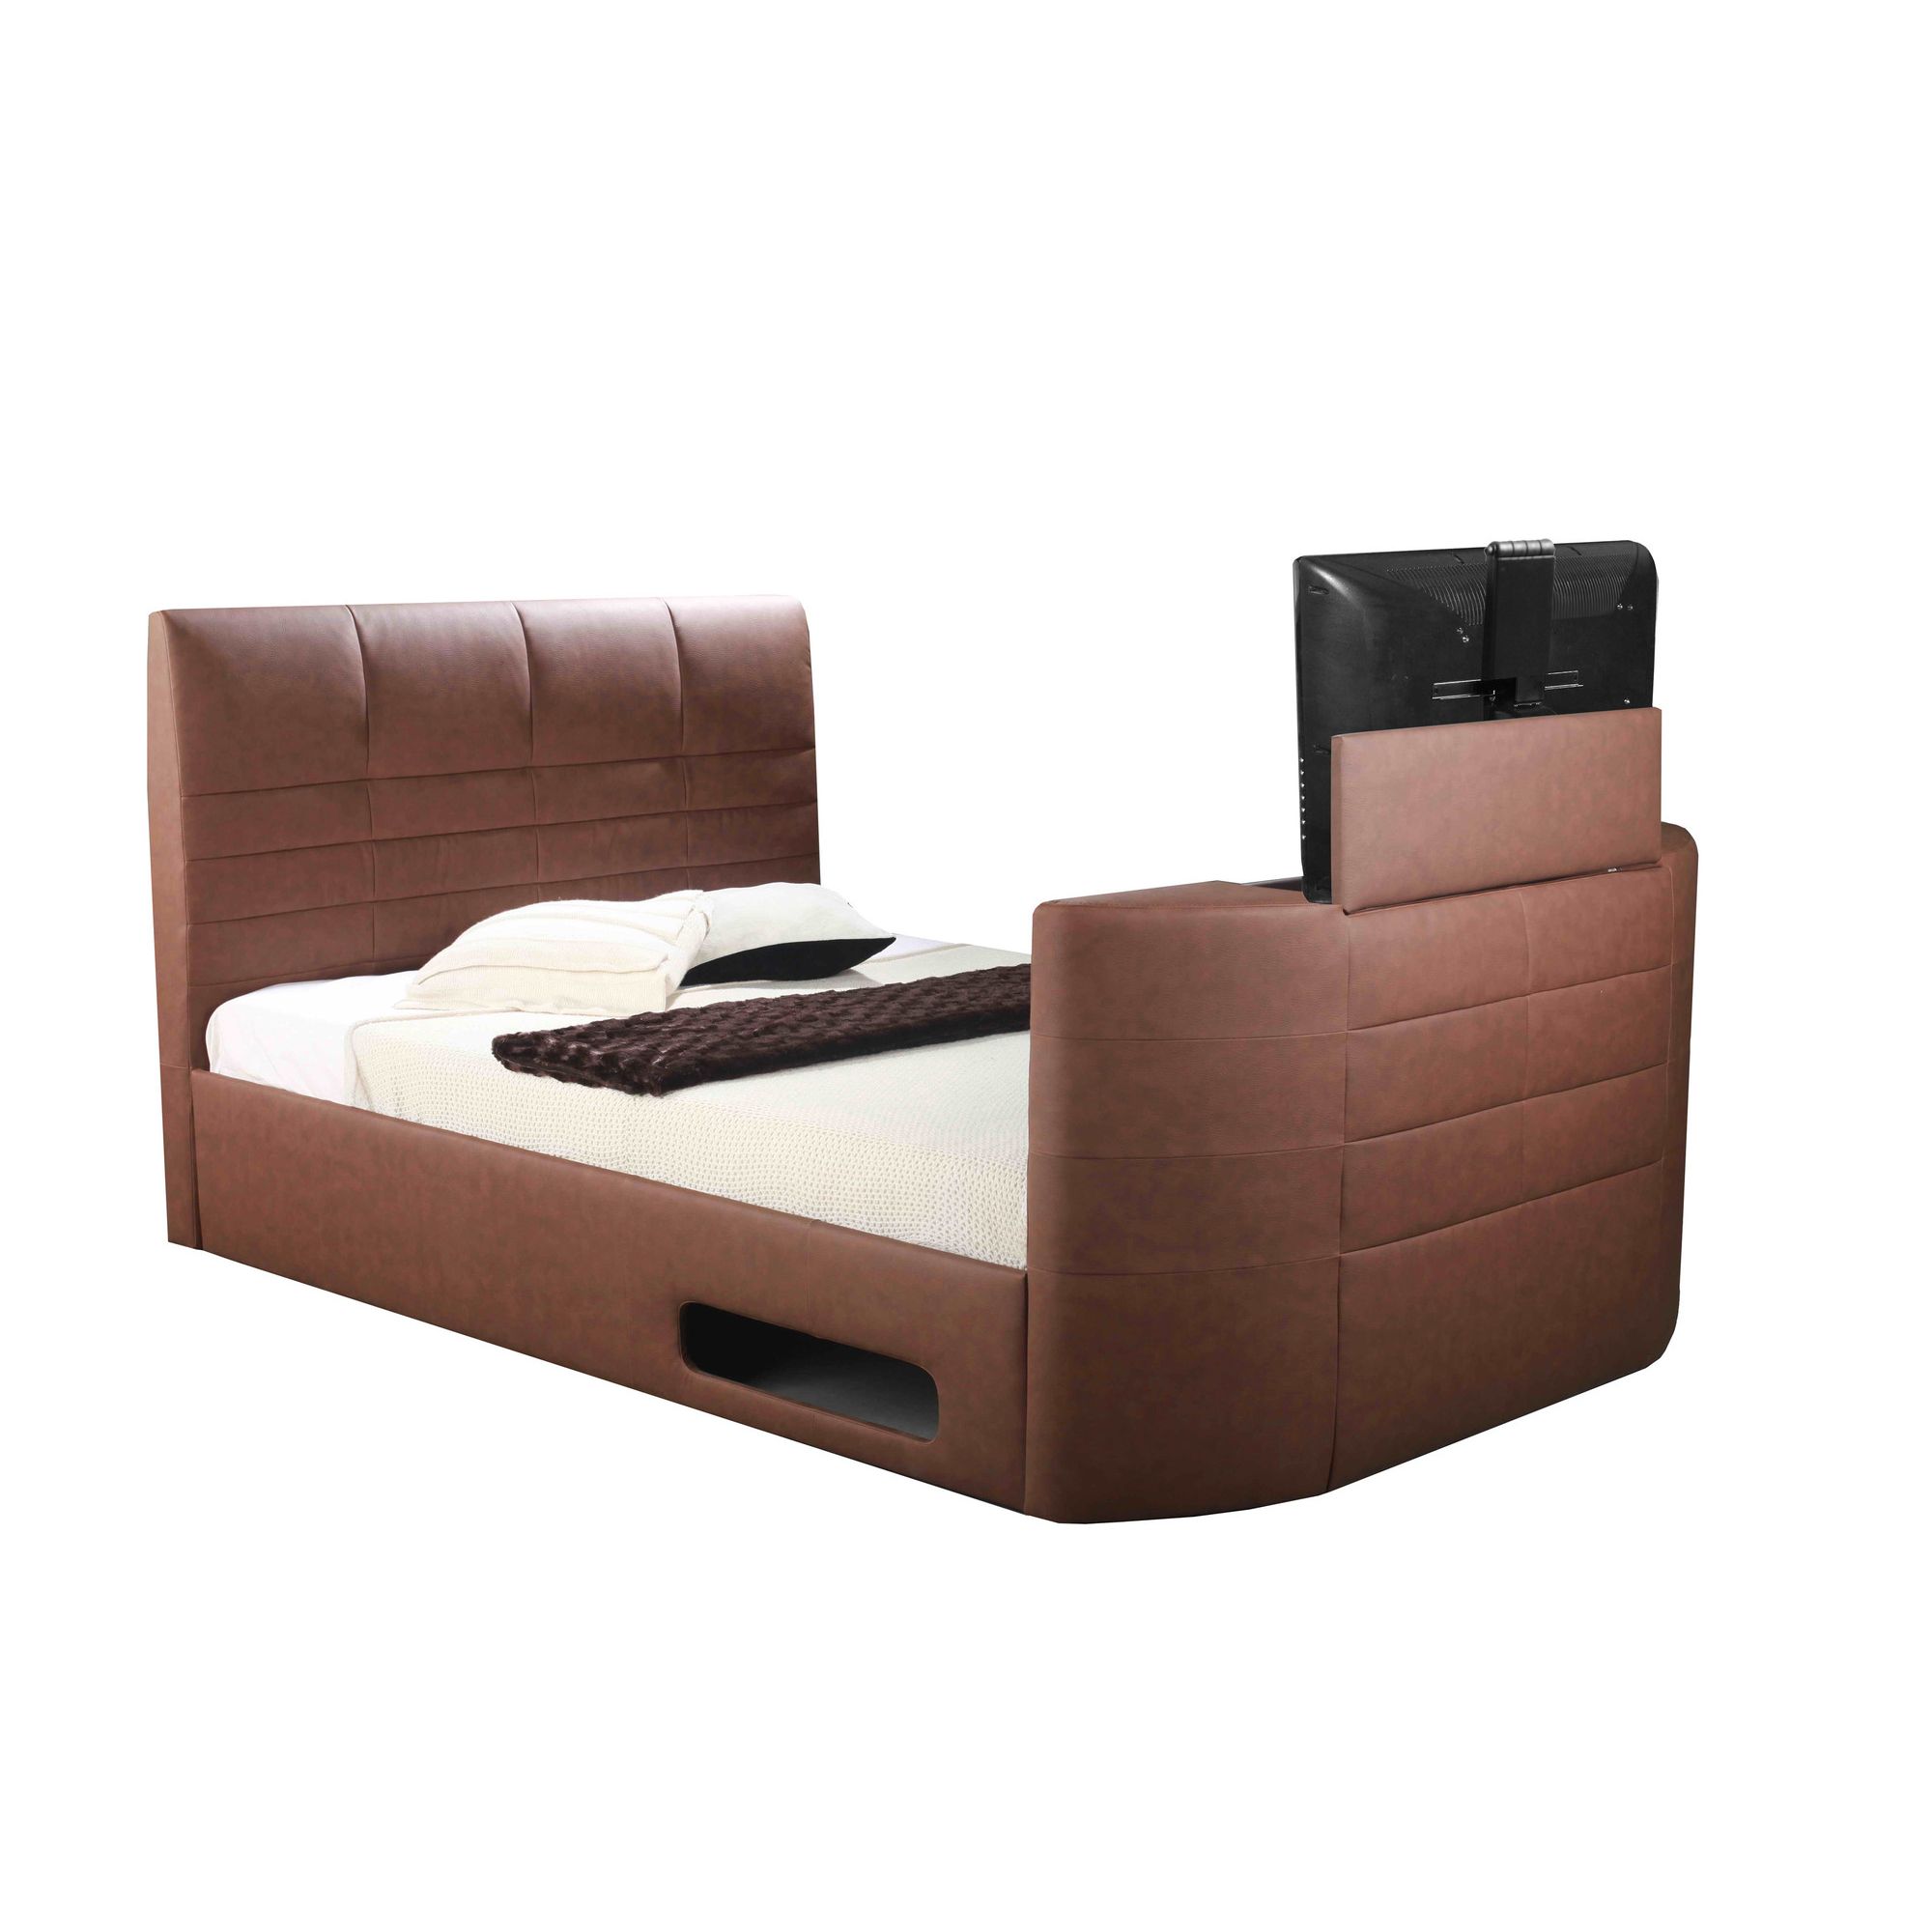 Altruna Miami Electric Wireless TV Bed - Double - Chocolate Brown - With Ottoman at Tescos Direct